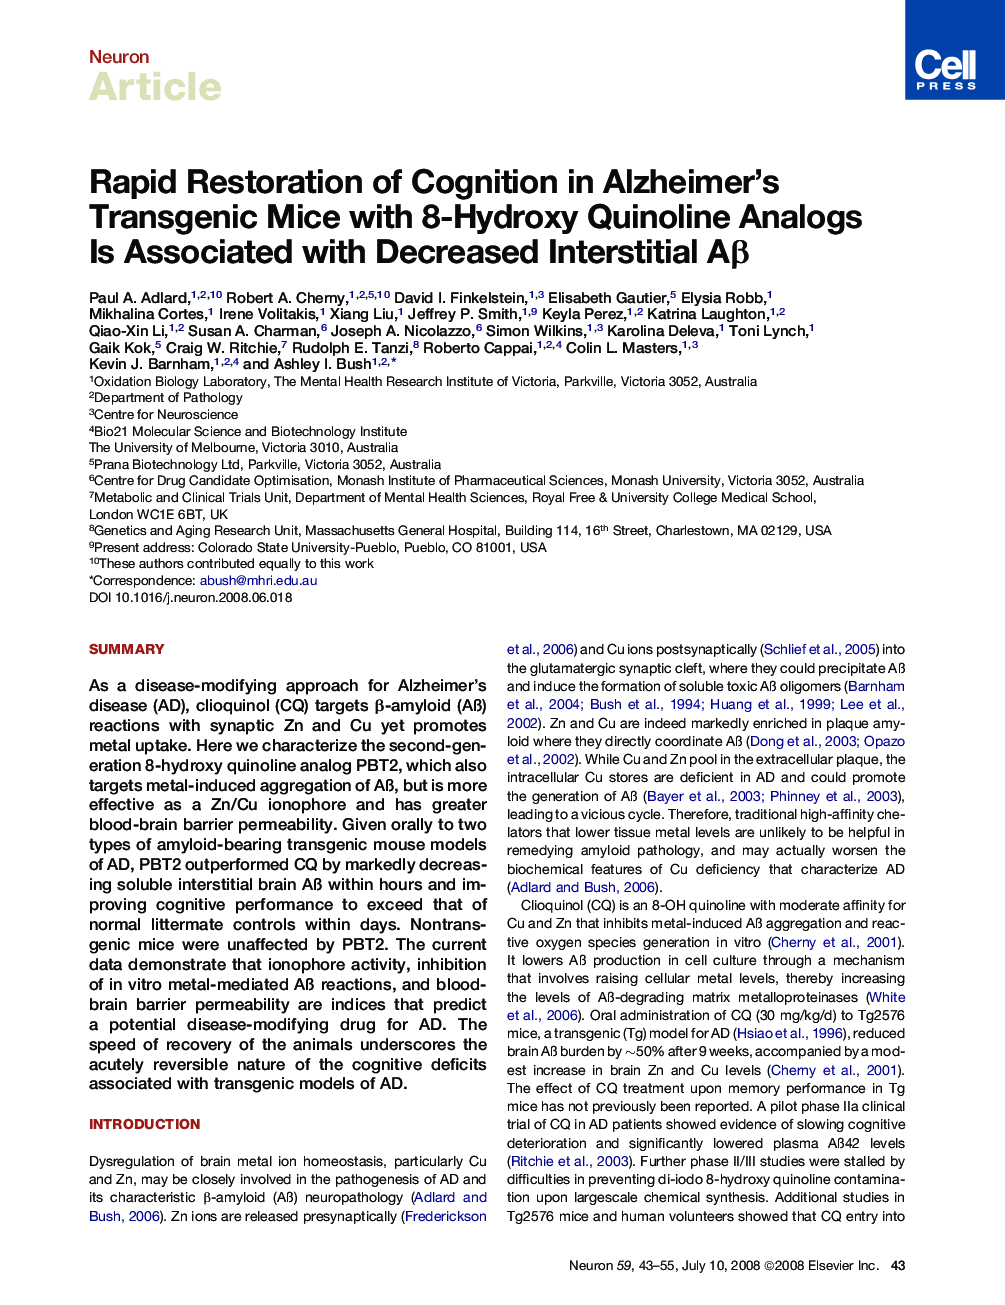 Rapid Restoration of Cognition in Alzheimer's Transgenic Mice with 8-Hydroxy Quinoline Analogs Is Associated with Decreased Interstitial Aβ